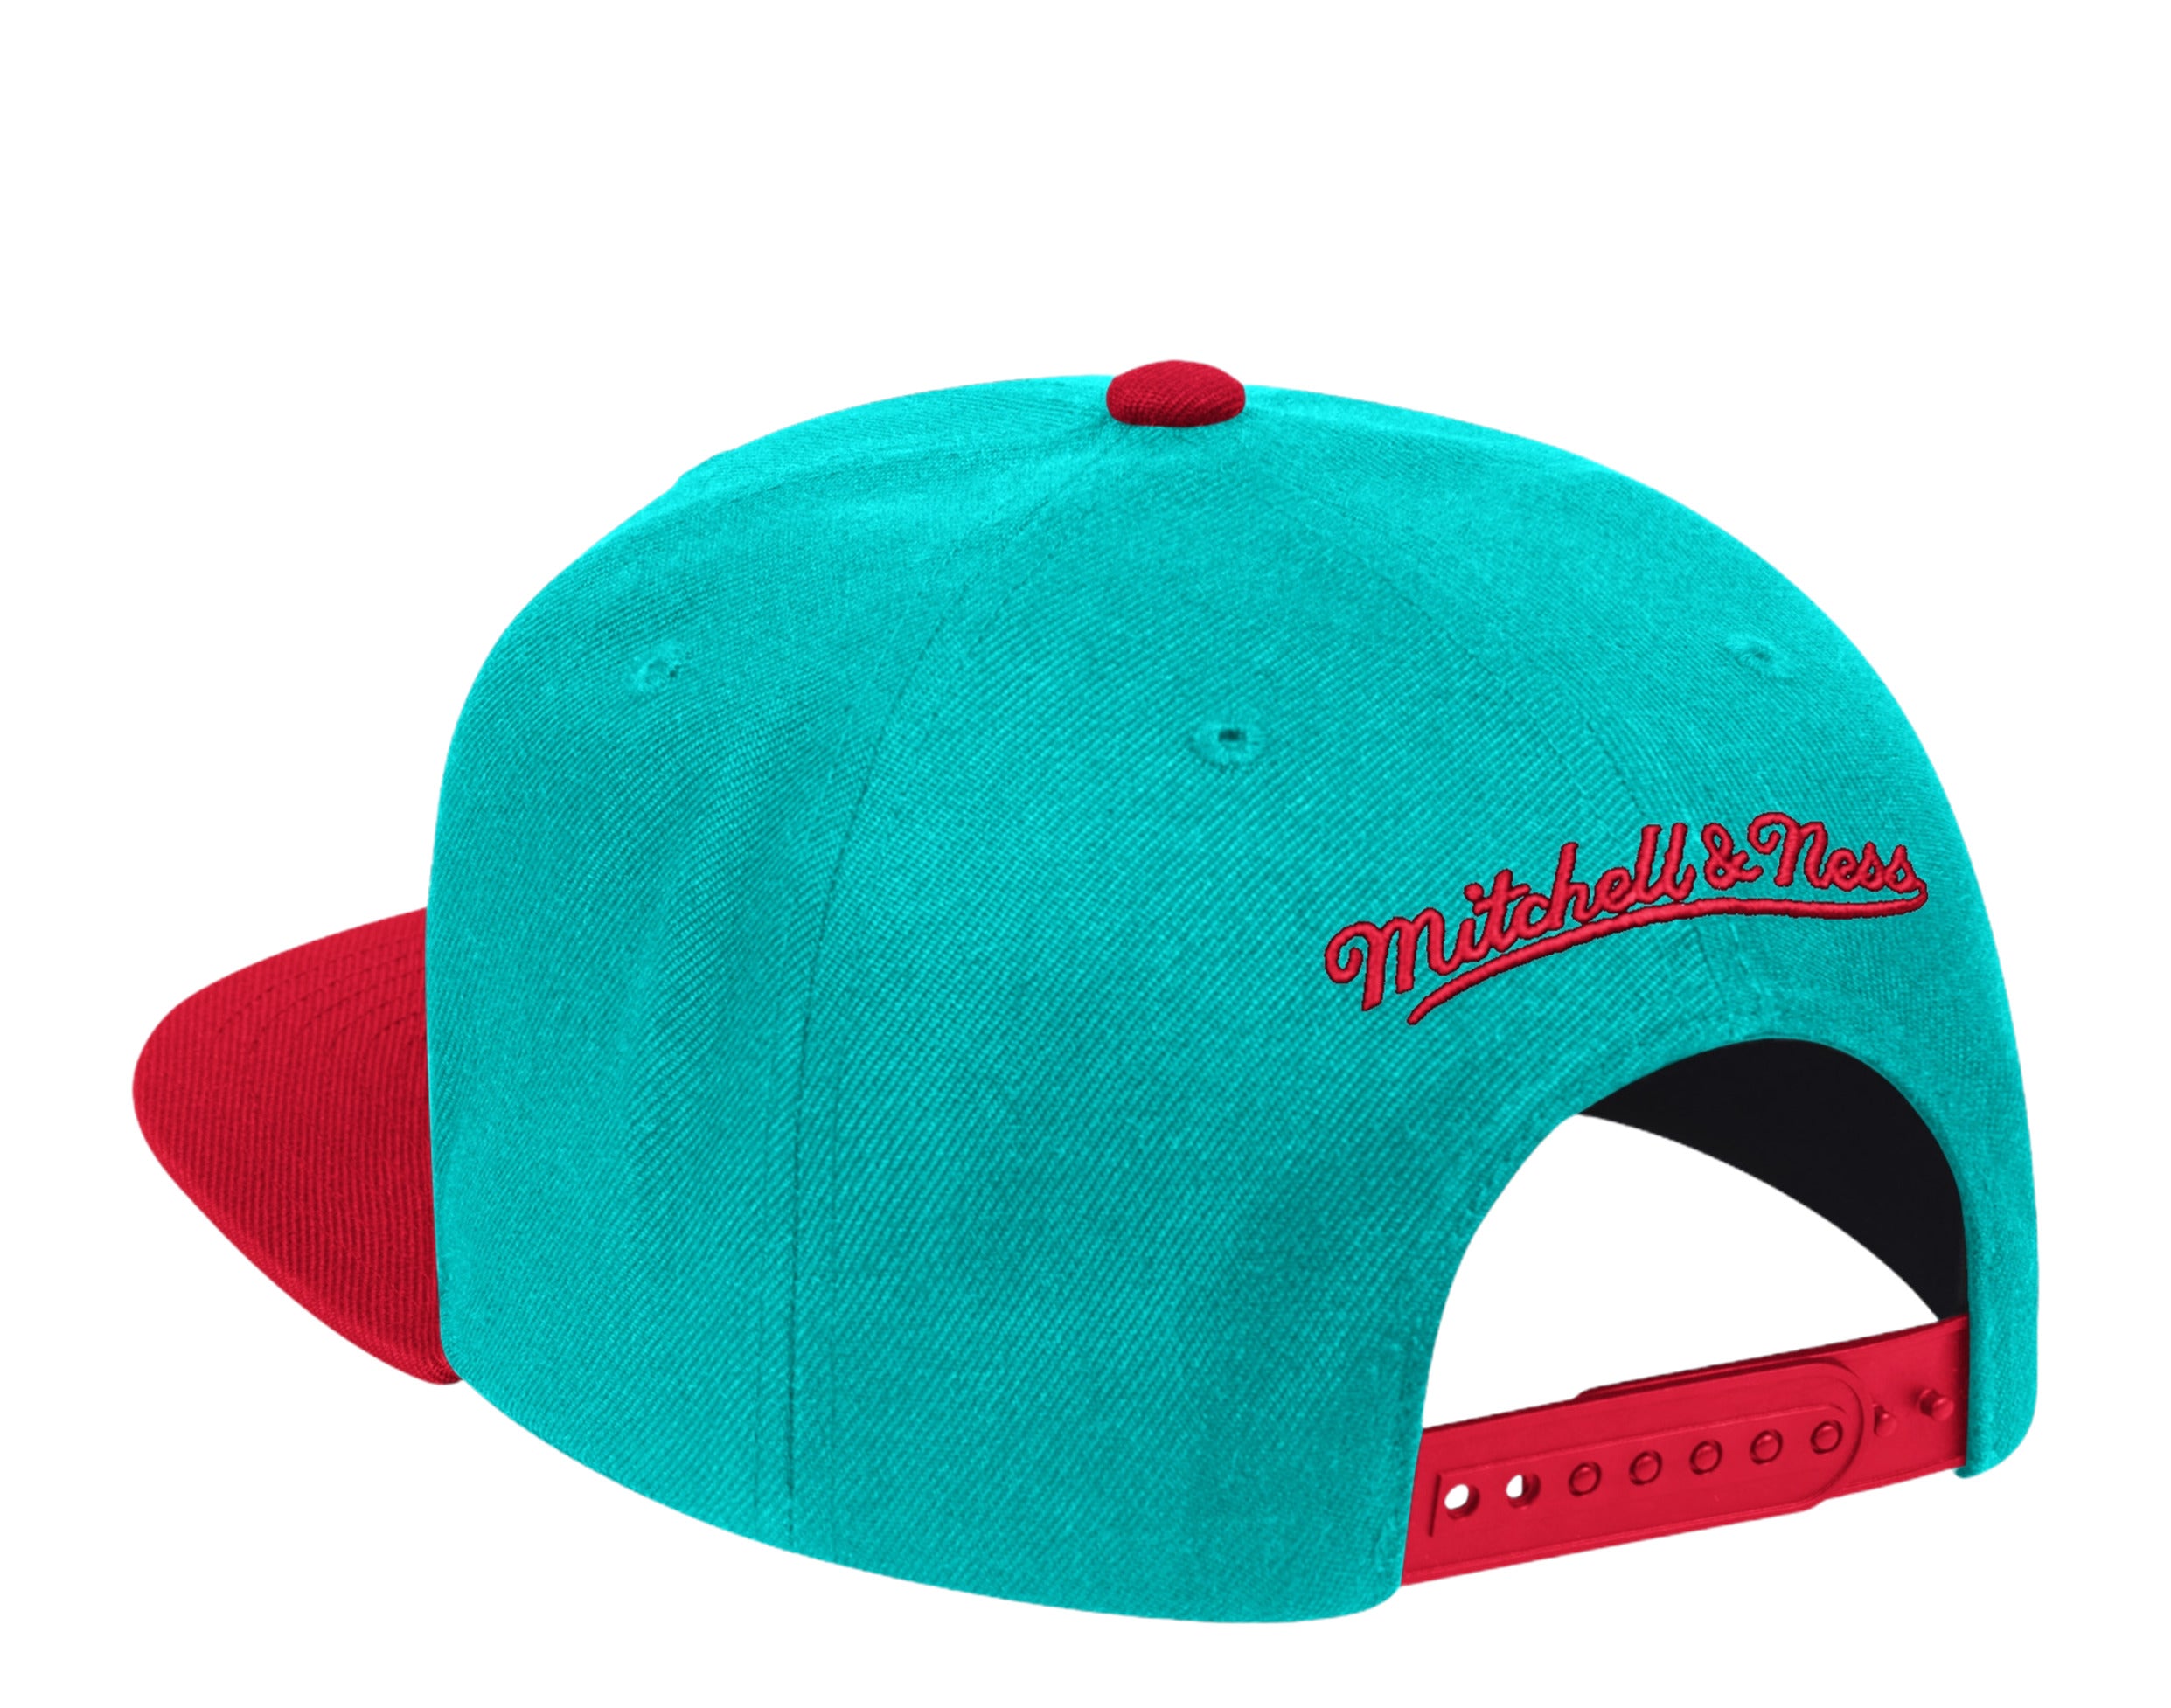 Men's Mitchell & Ness x Lids White/Red Vancouver Grizzlies